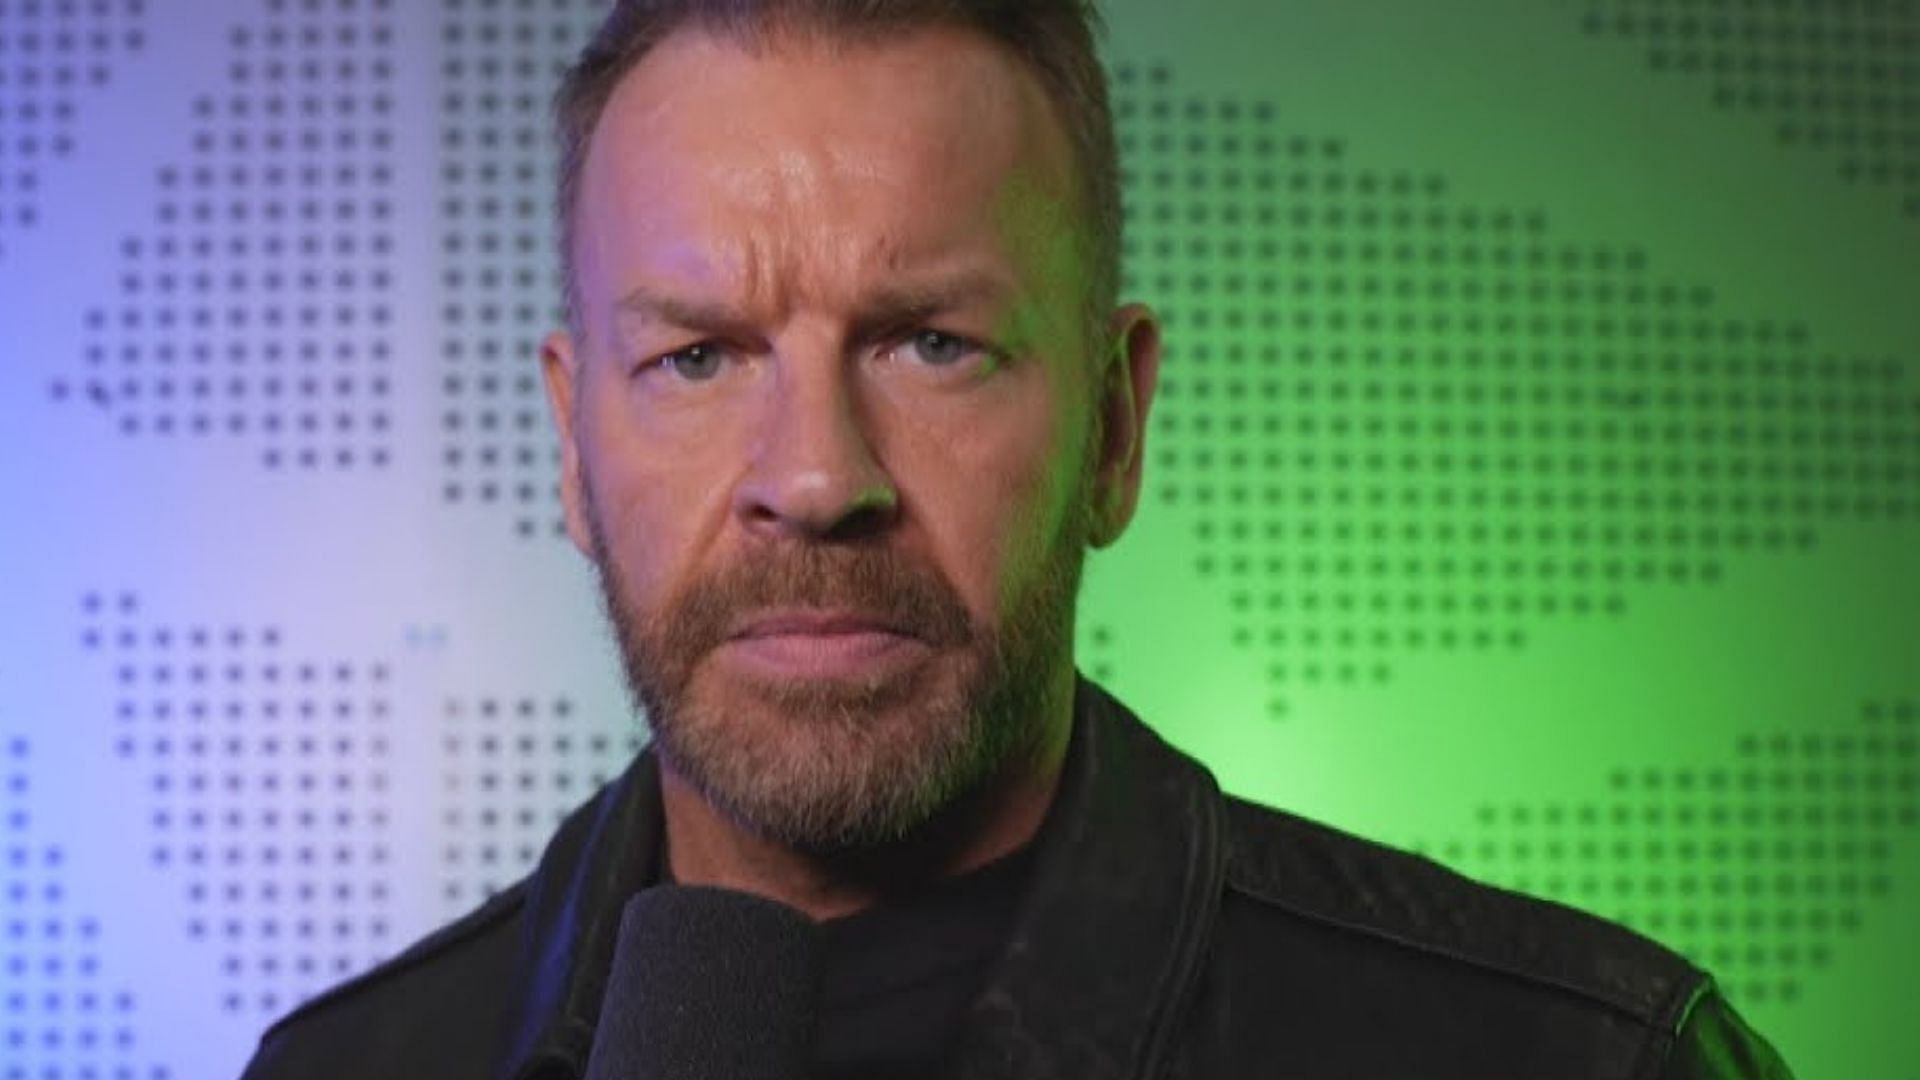 Christian Cage is a former WWE superstar